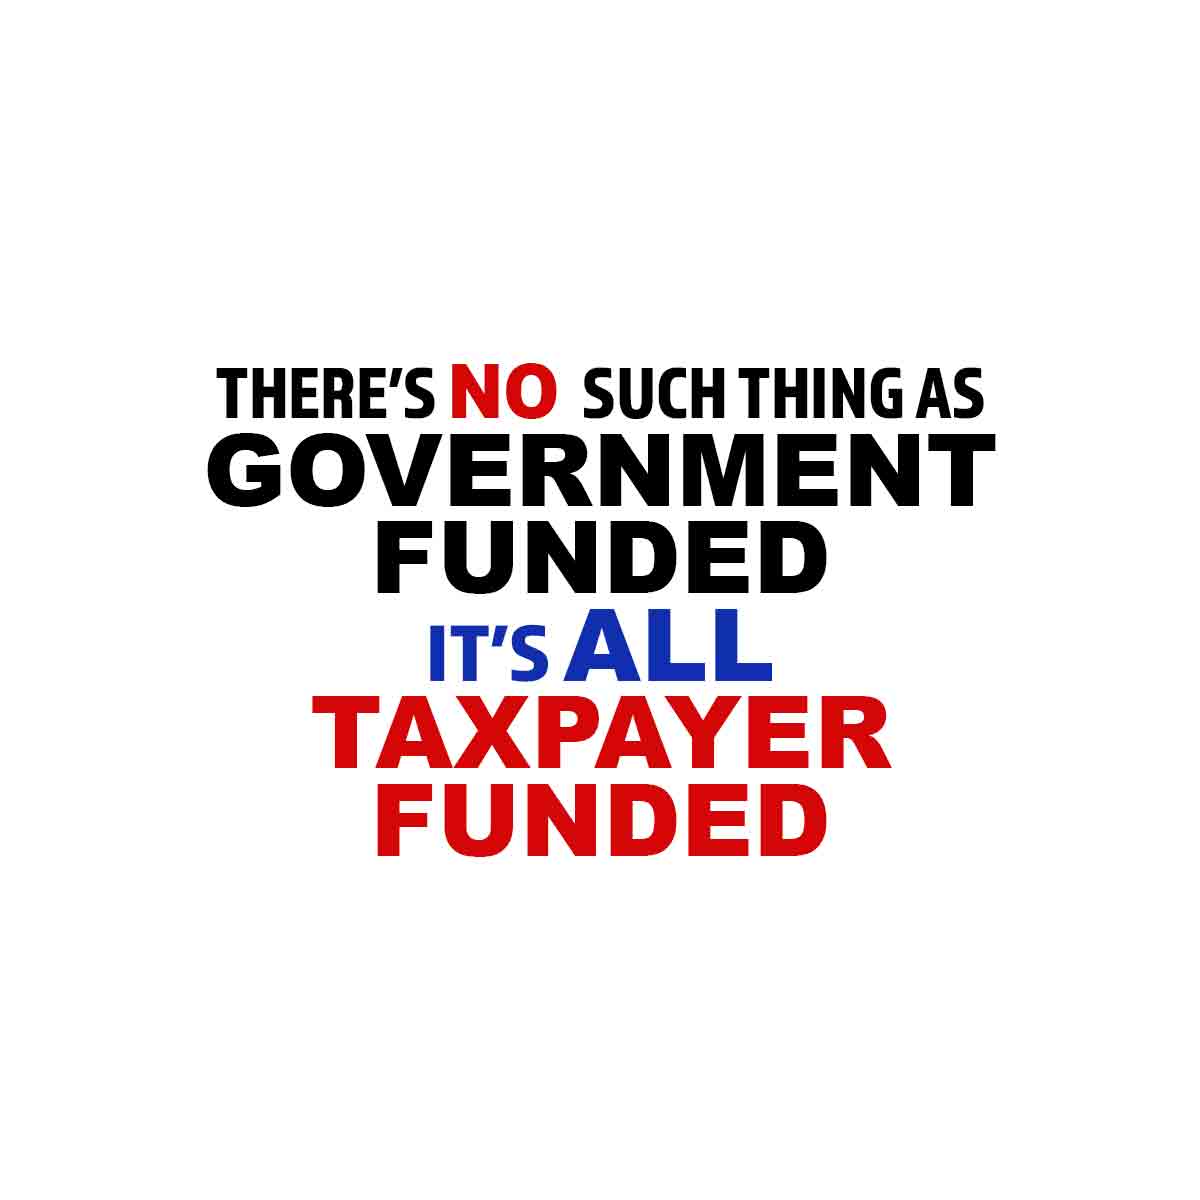 There is no such thing Taxpayer funded